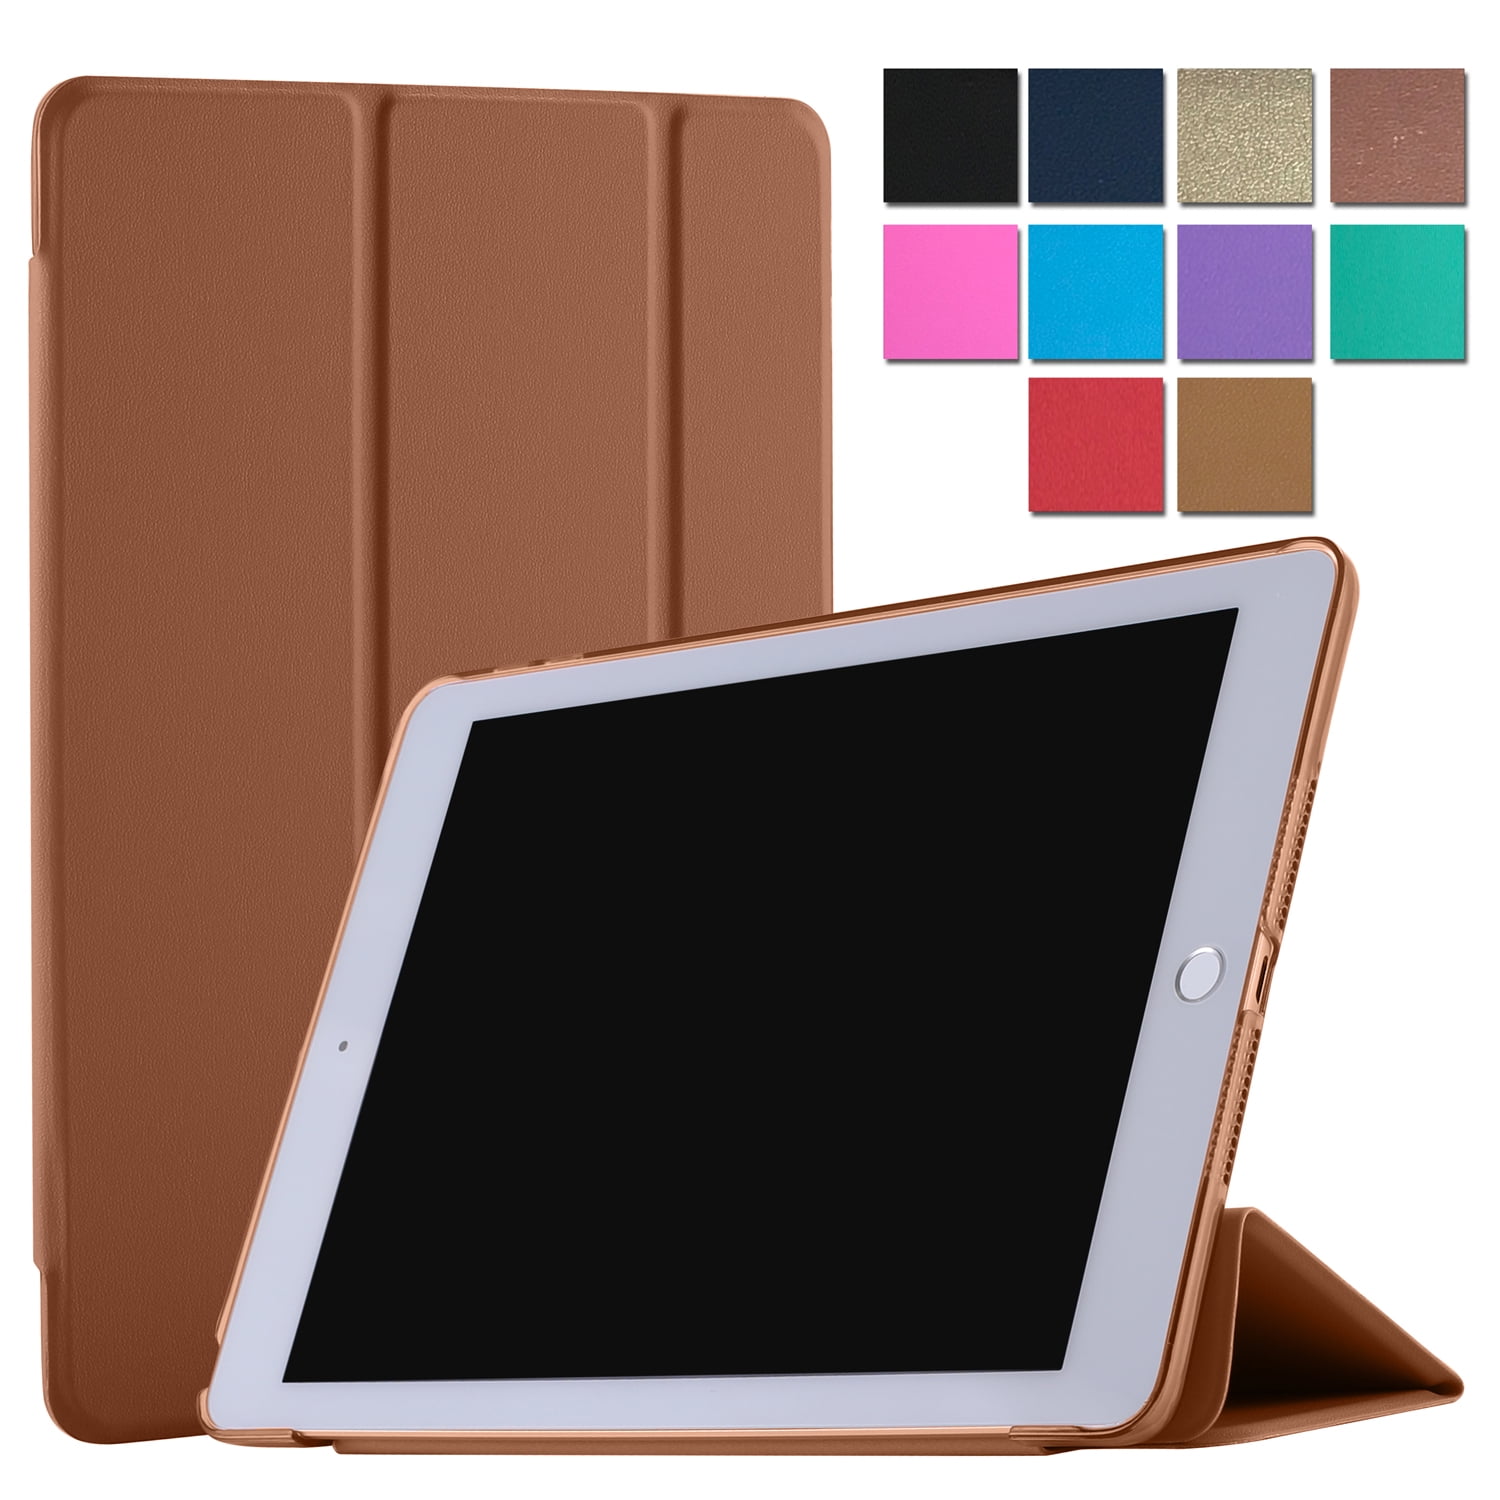 DuraSafe Cases for iPad Air 1 Gen 2013 9.7 Inch [ A1474 A1475 ] Tri Fold Smart Cover with